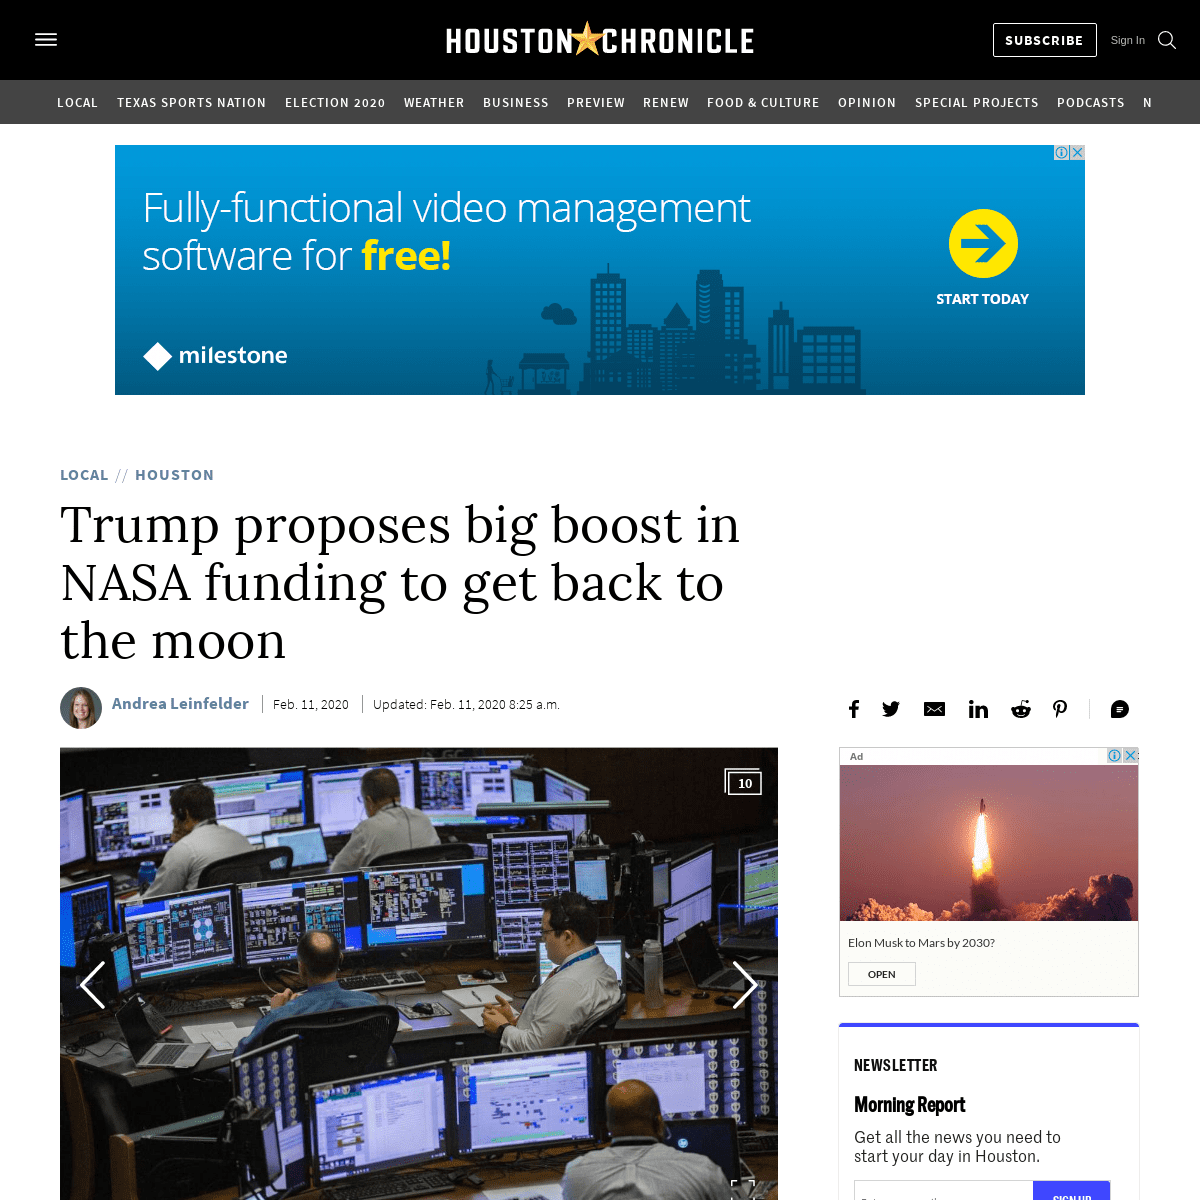 A complete backup of www.houstonchronicle.com/news/houston-texas/houston/article/Trump-proposes-big-boost-in-NASA-funding-to-get